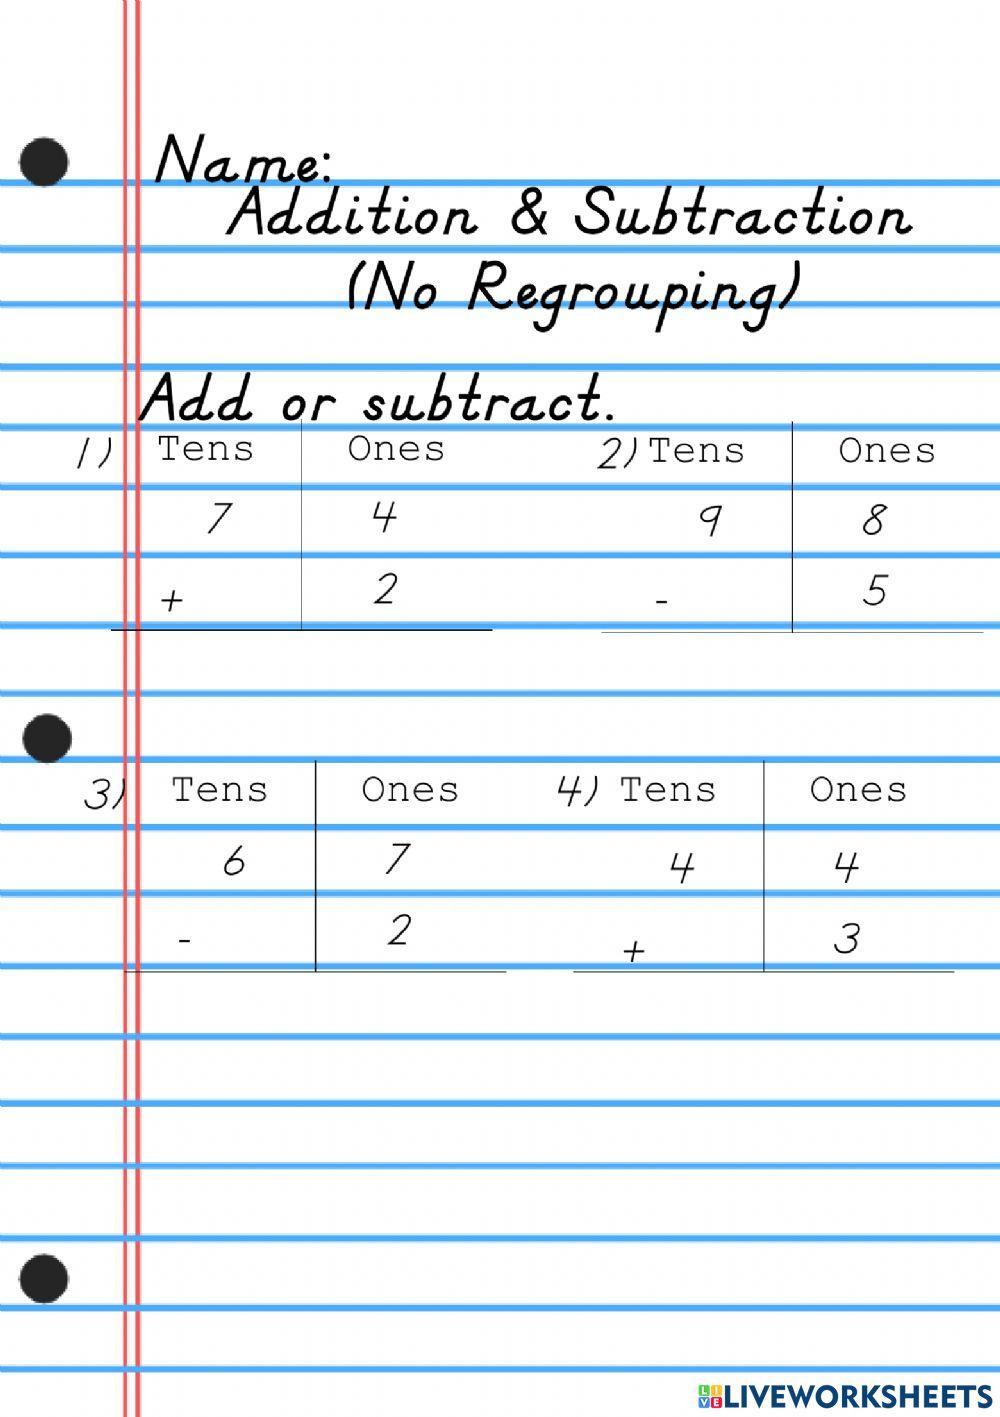 Addition and subtraction without regrouping